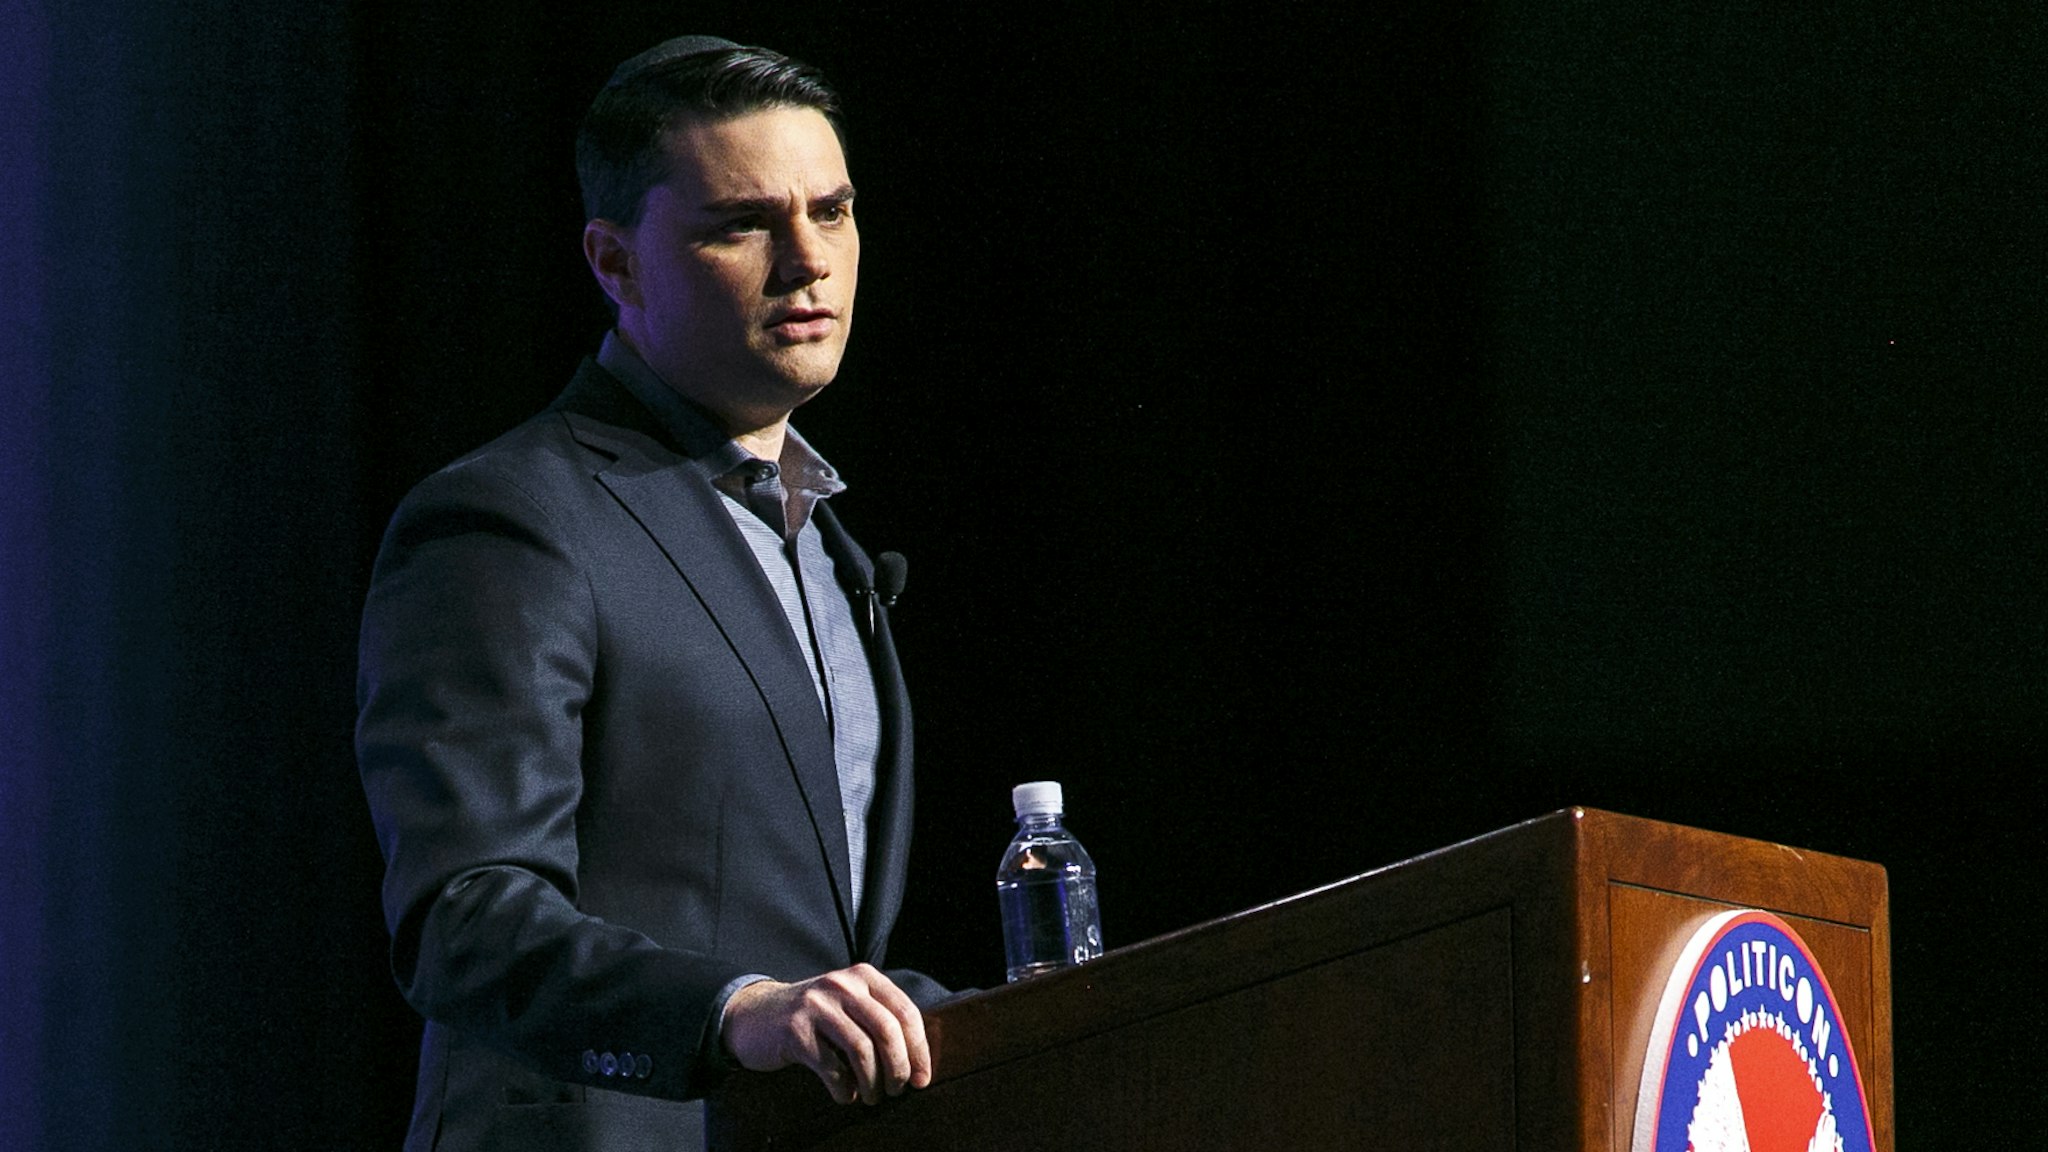 Ben Shapiro speaks onstage during Politicon 2018 at Los Angeles Convention Center on October 21, 2018 in Los Angeles, California. (Photo by Rich Polk/Getty Images for Politicon )